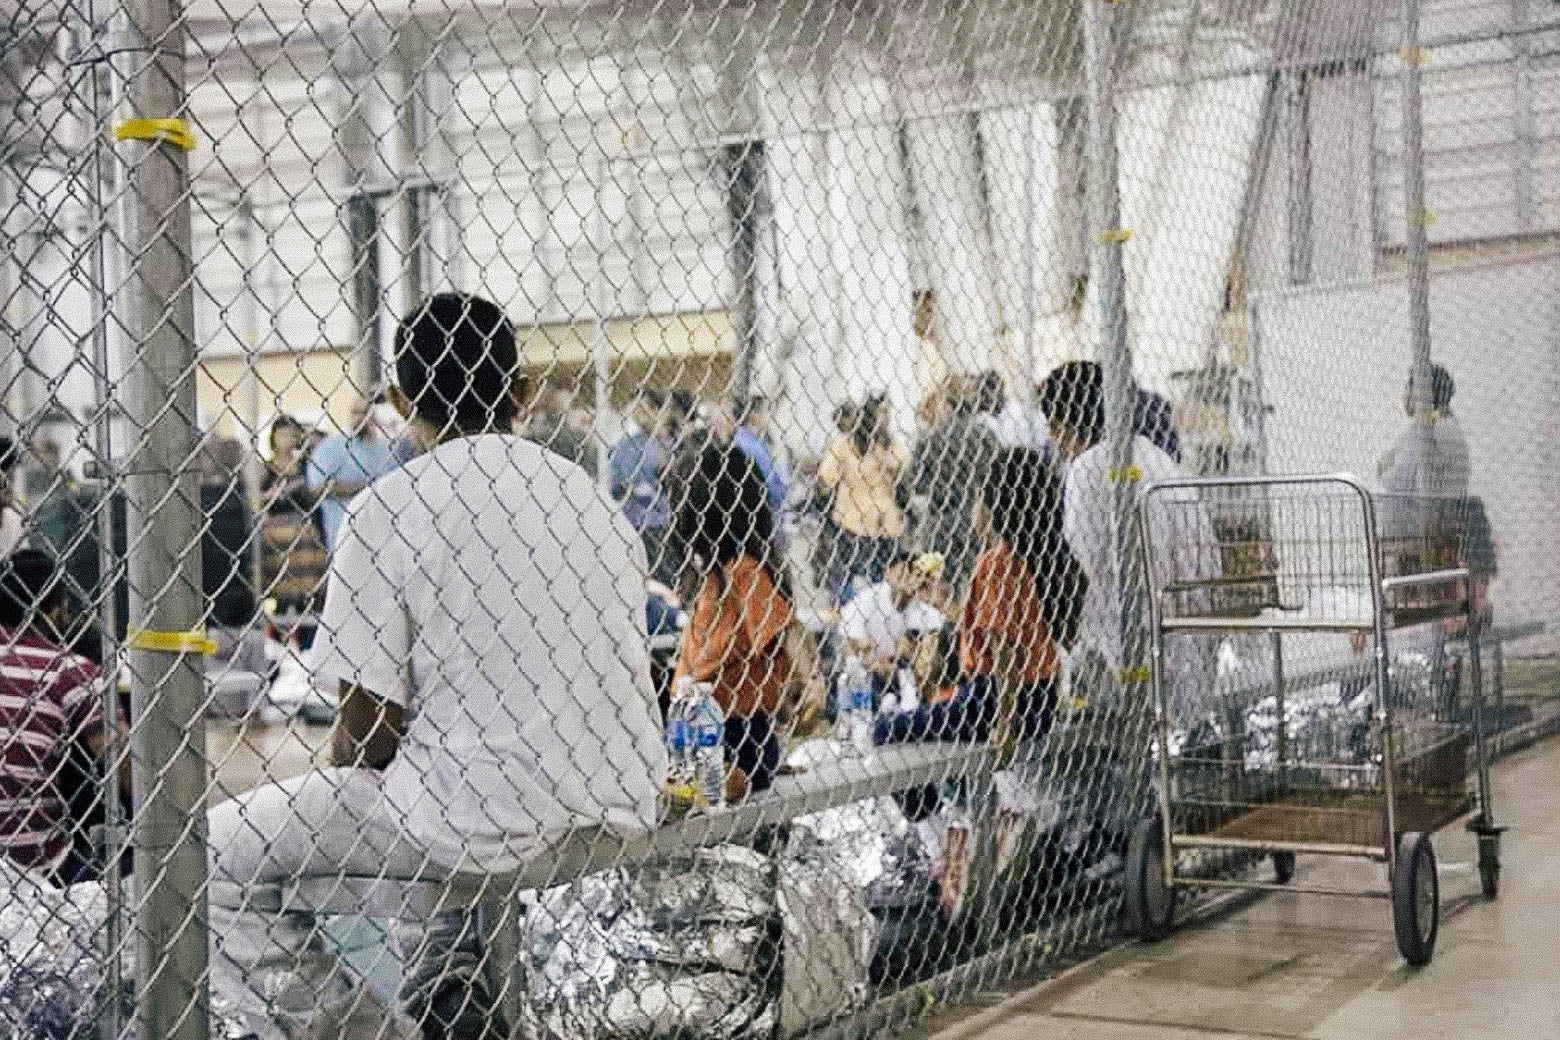 Migrants in a detention facility